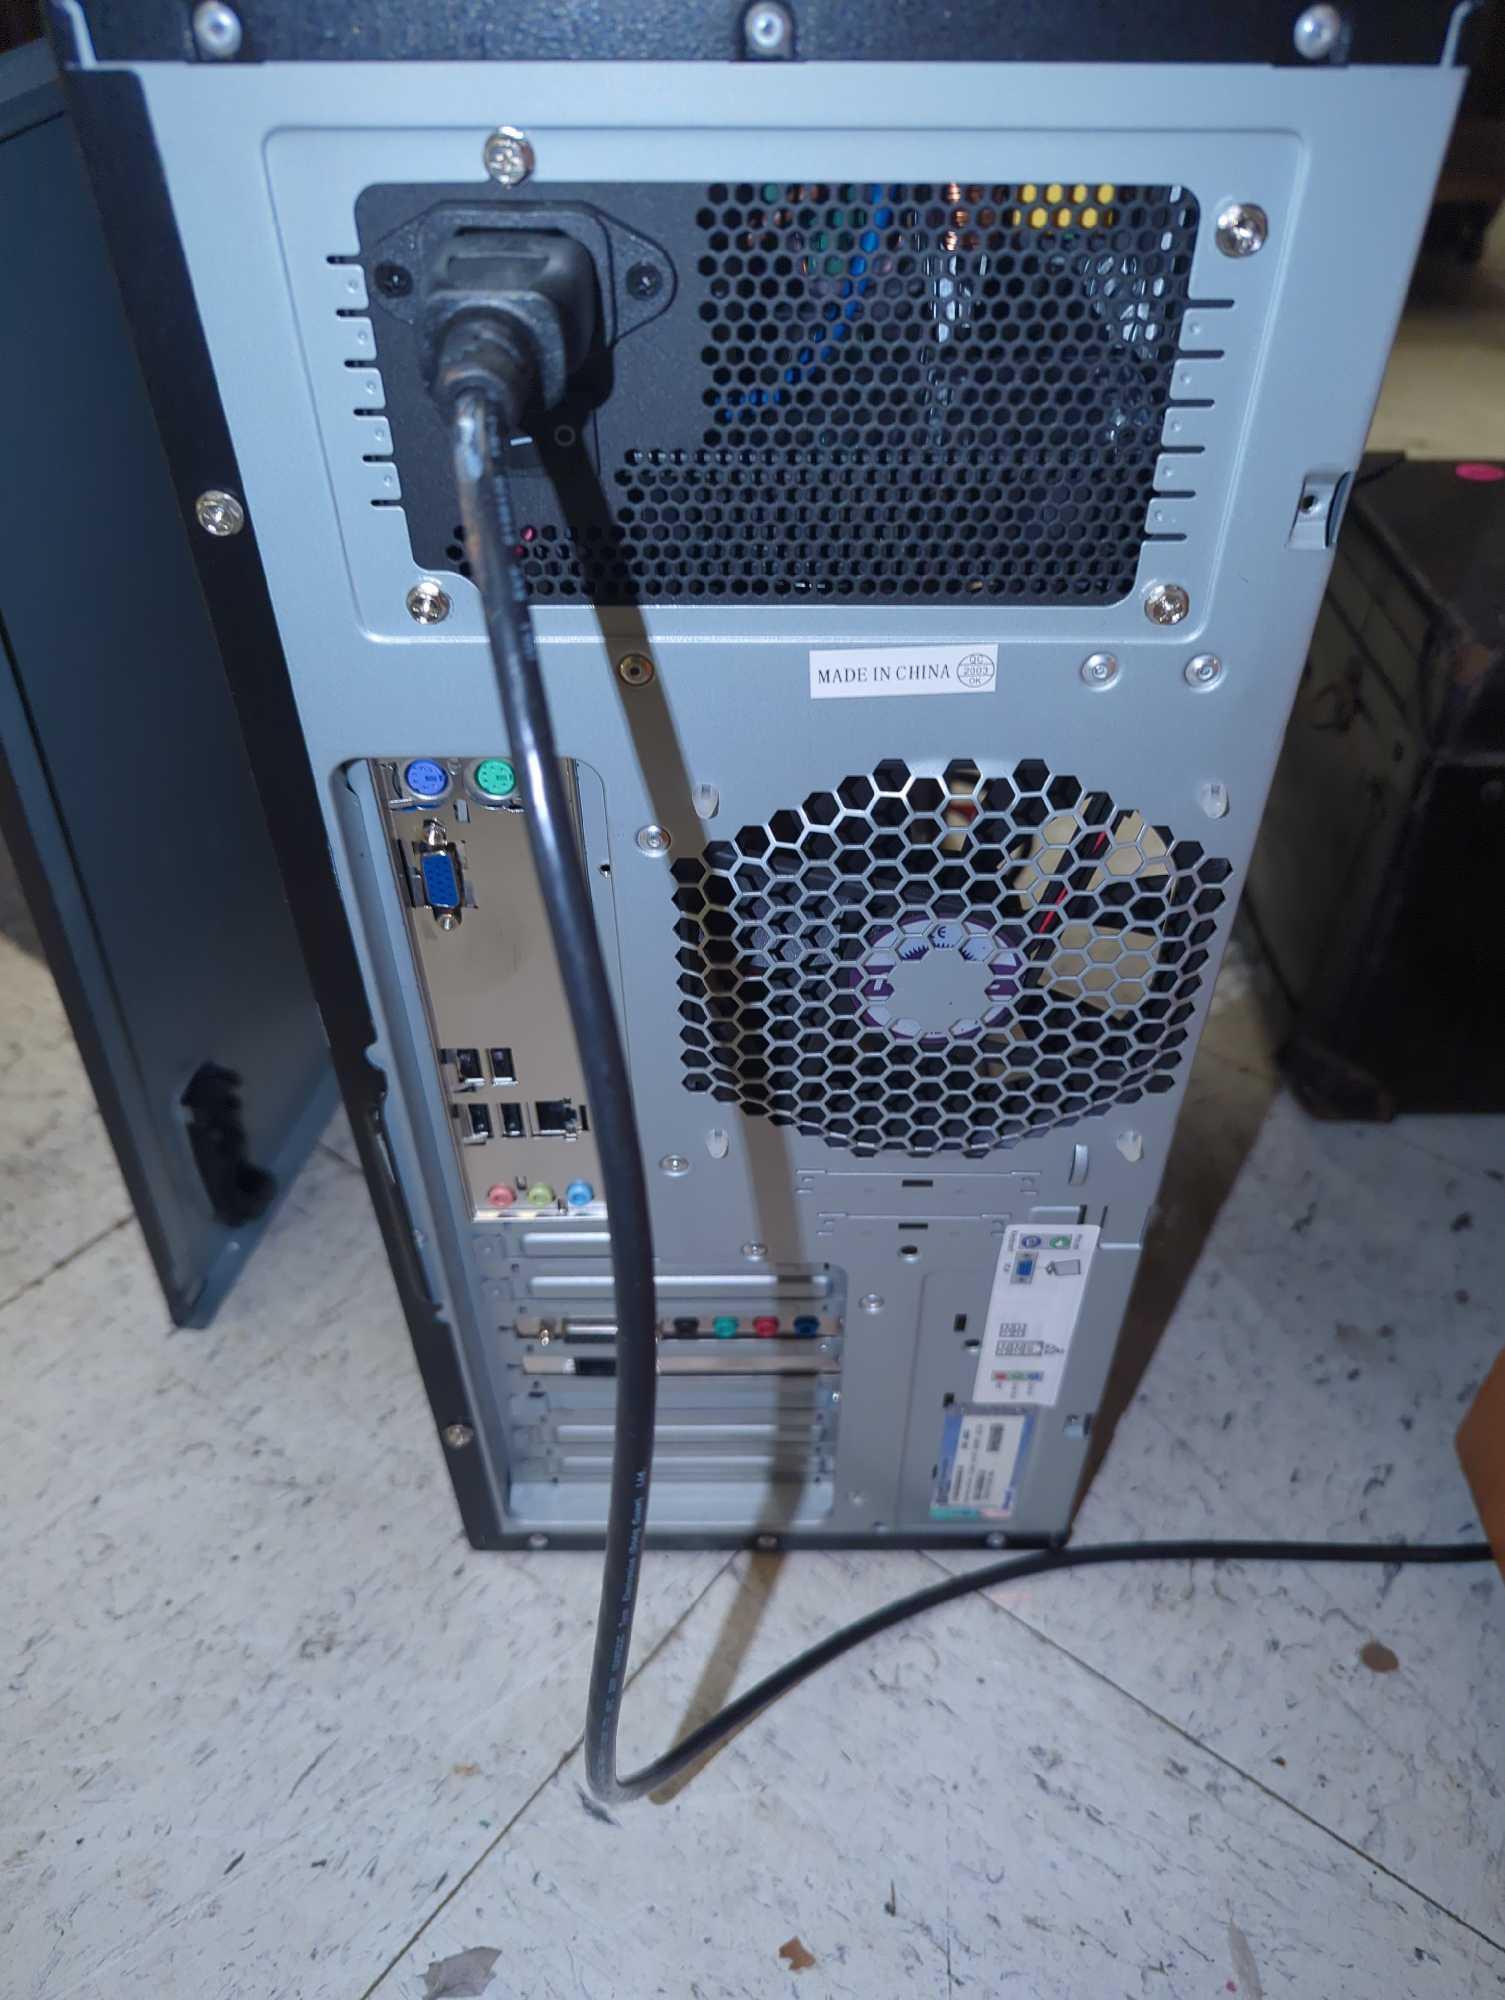 Home Desktop PC Tower with Corsair CX430 Power Supply, Approximate Dimensions - 18" H x 8.5" W x 18"